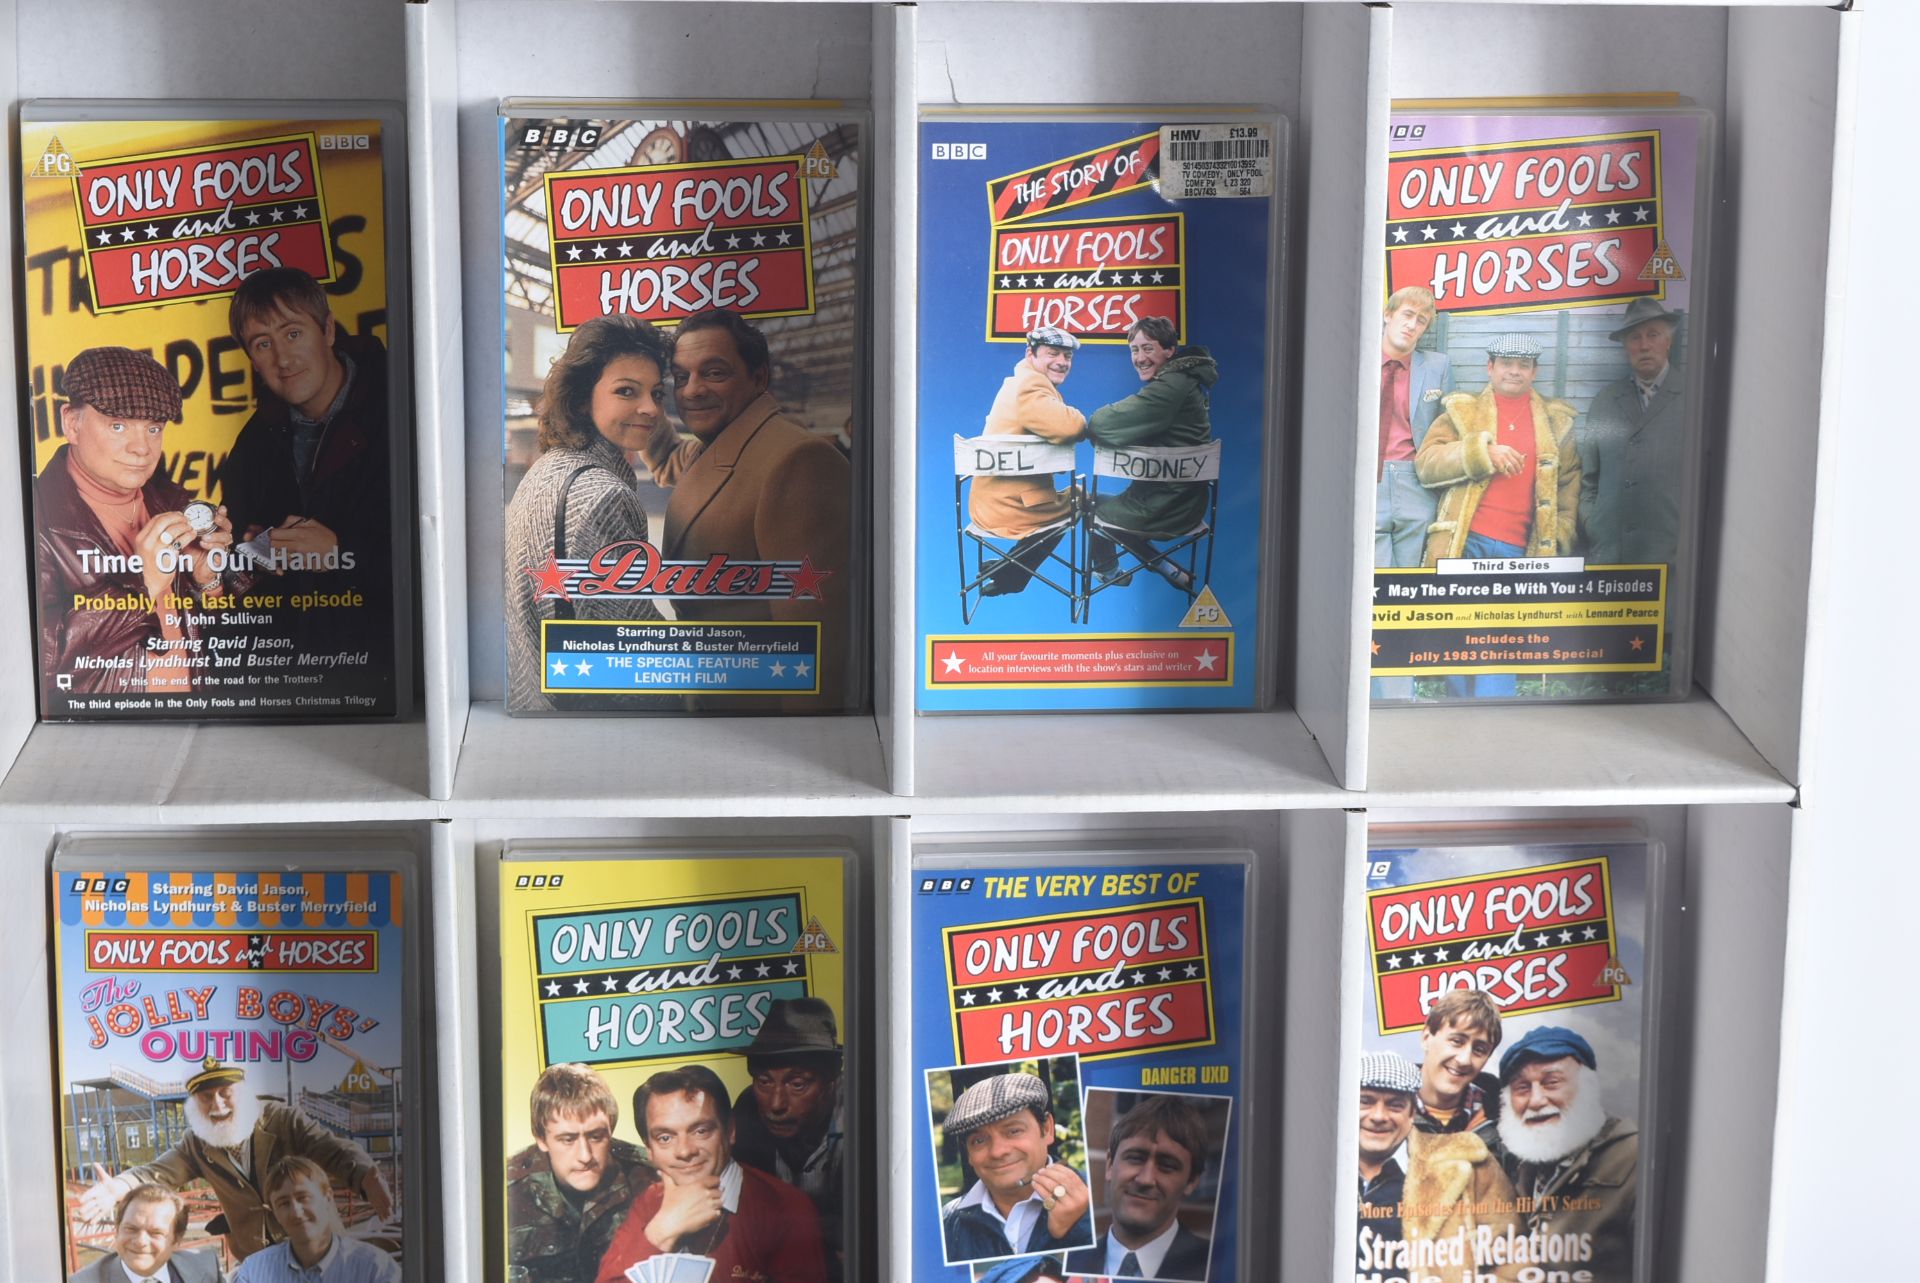 ONLY FOOLS & HORSES - ORIGINAL IN-STORE VHS DISPLAY STAND - Image 3 of 5